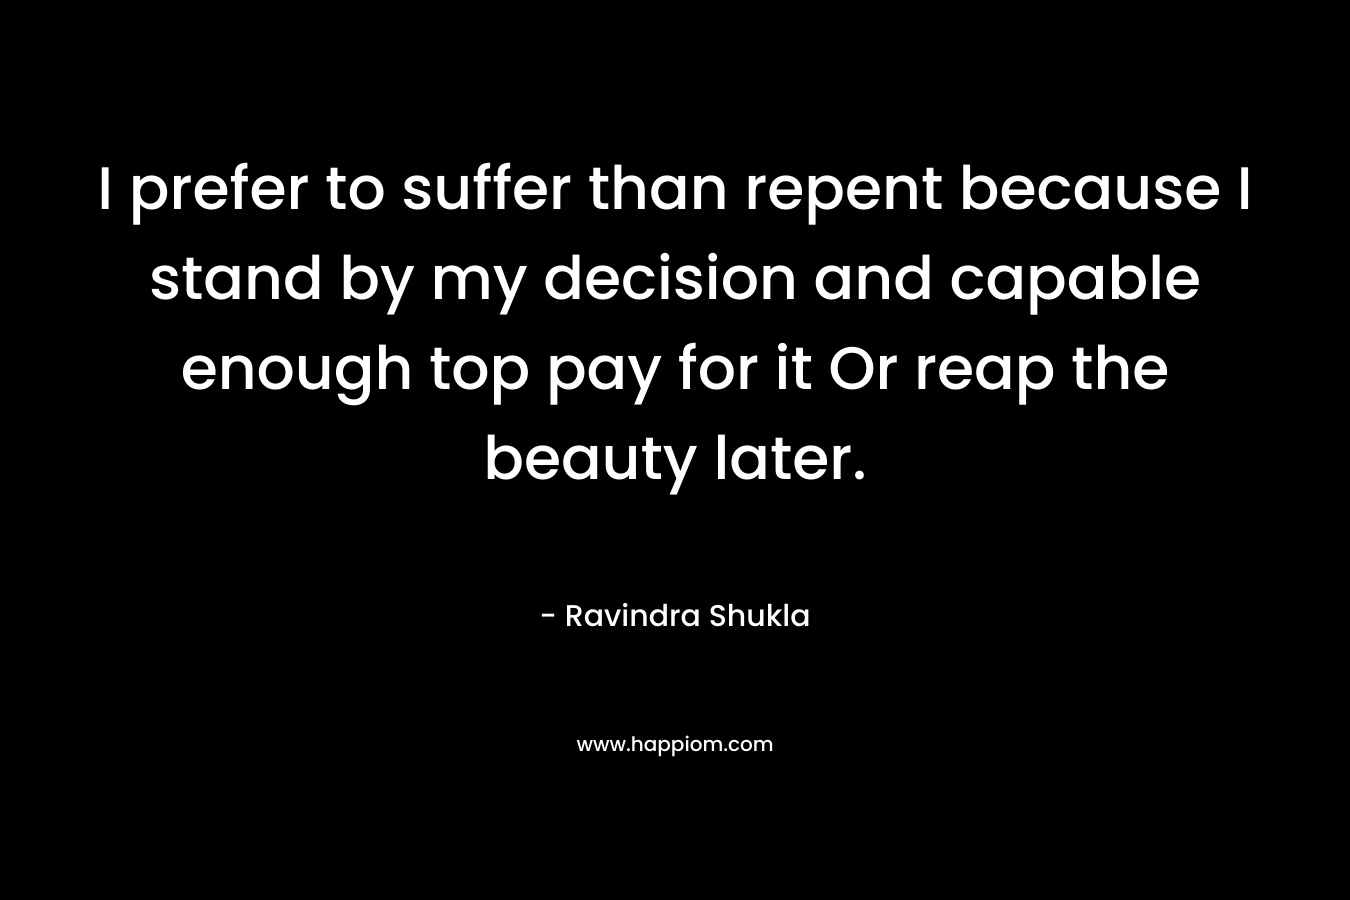 I prefer to suffer than repent because I stand by my decision and capable enough top pay for it Or reap the beauty later.